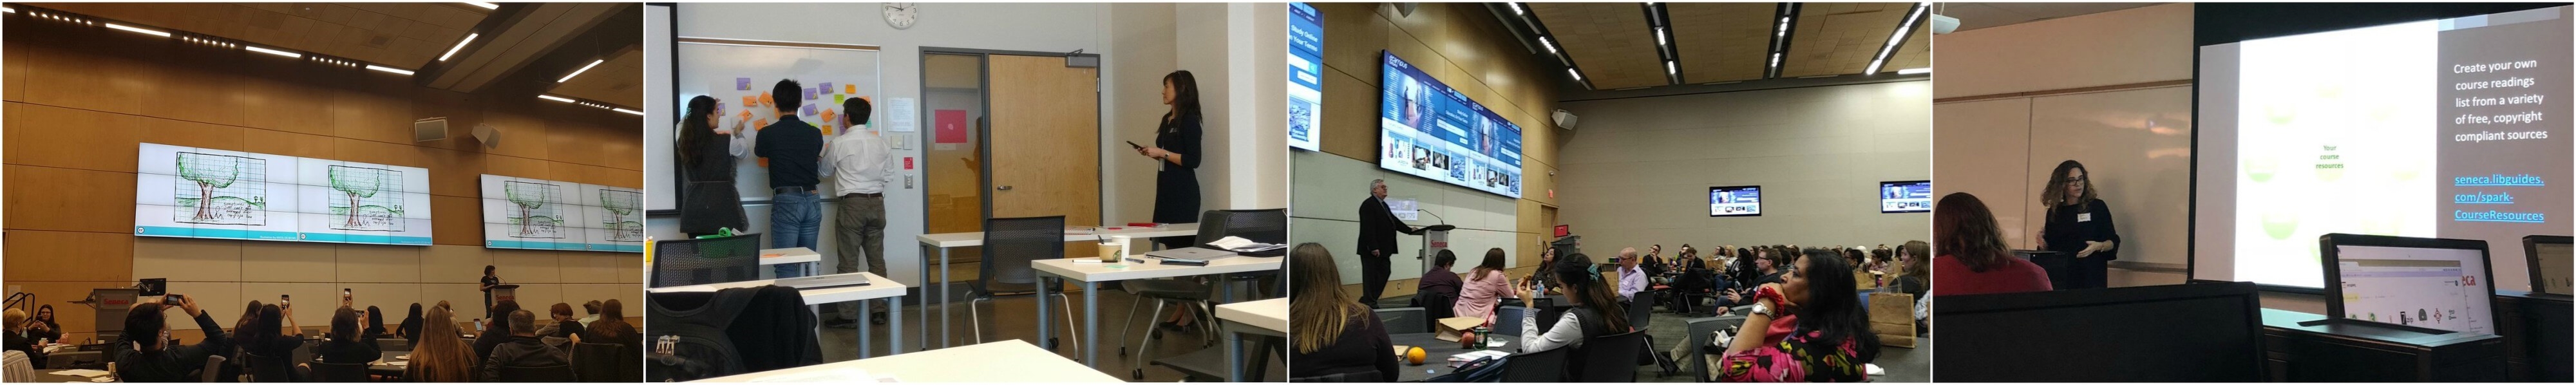 A collection of images from Teaching & Learning Day 2018: the morning speaker addressing the audience, a picture of some attendees collaborating on the board in a session, the afternoon speaker addressing the audience, and a picture of a session presenter beside her presentation display.